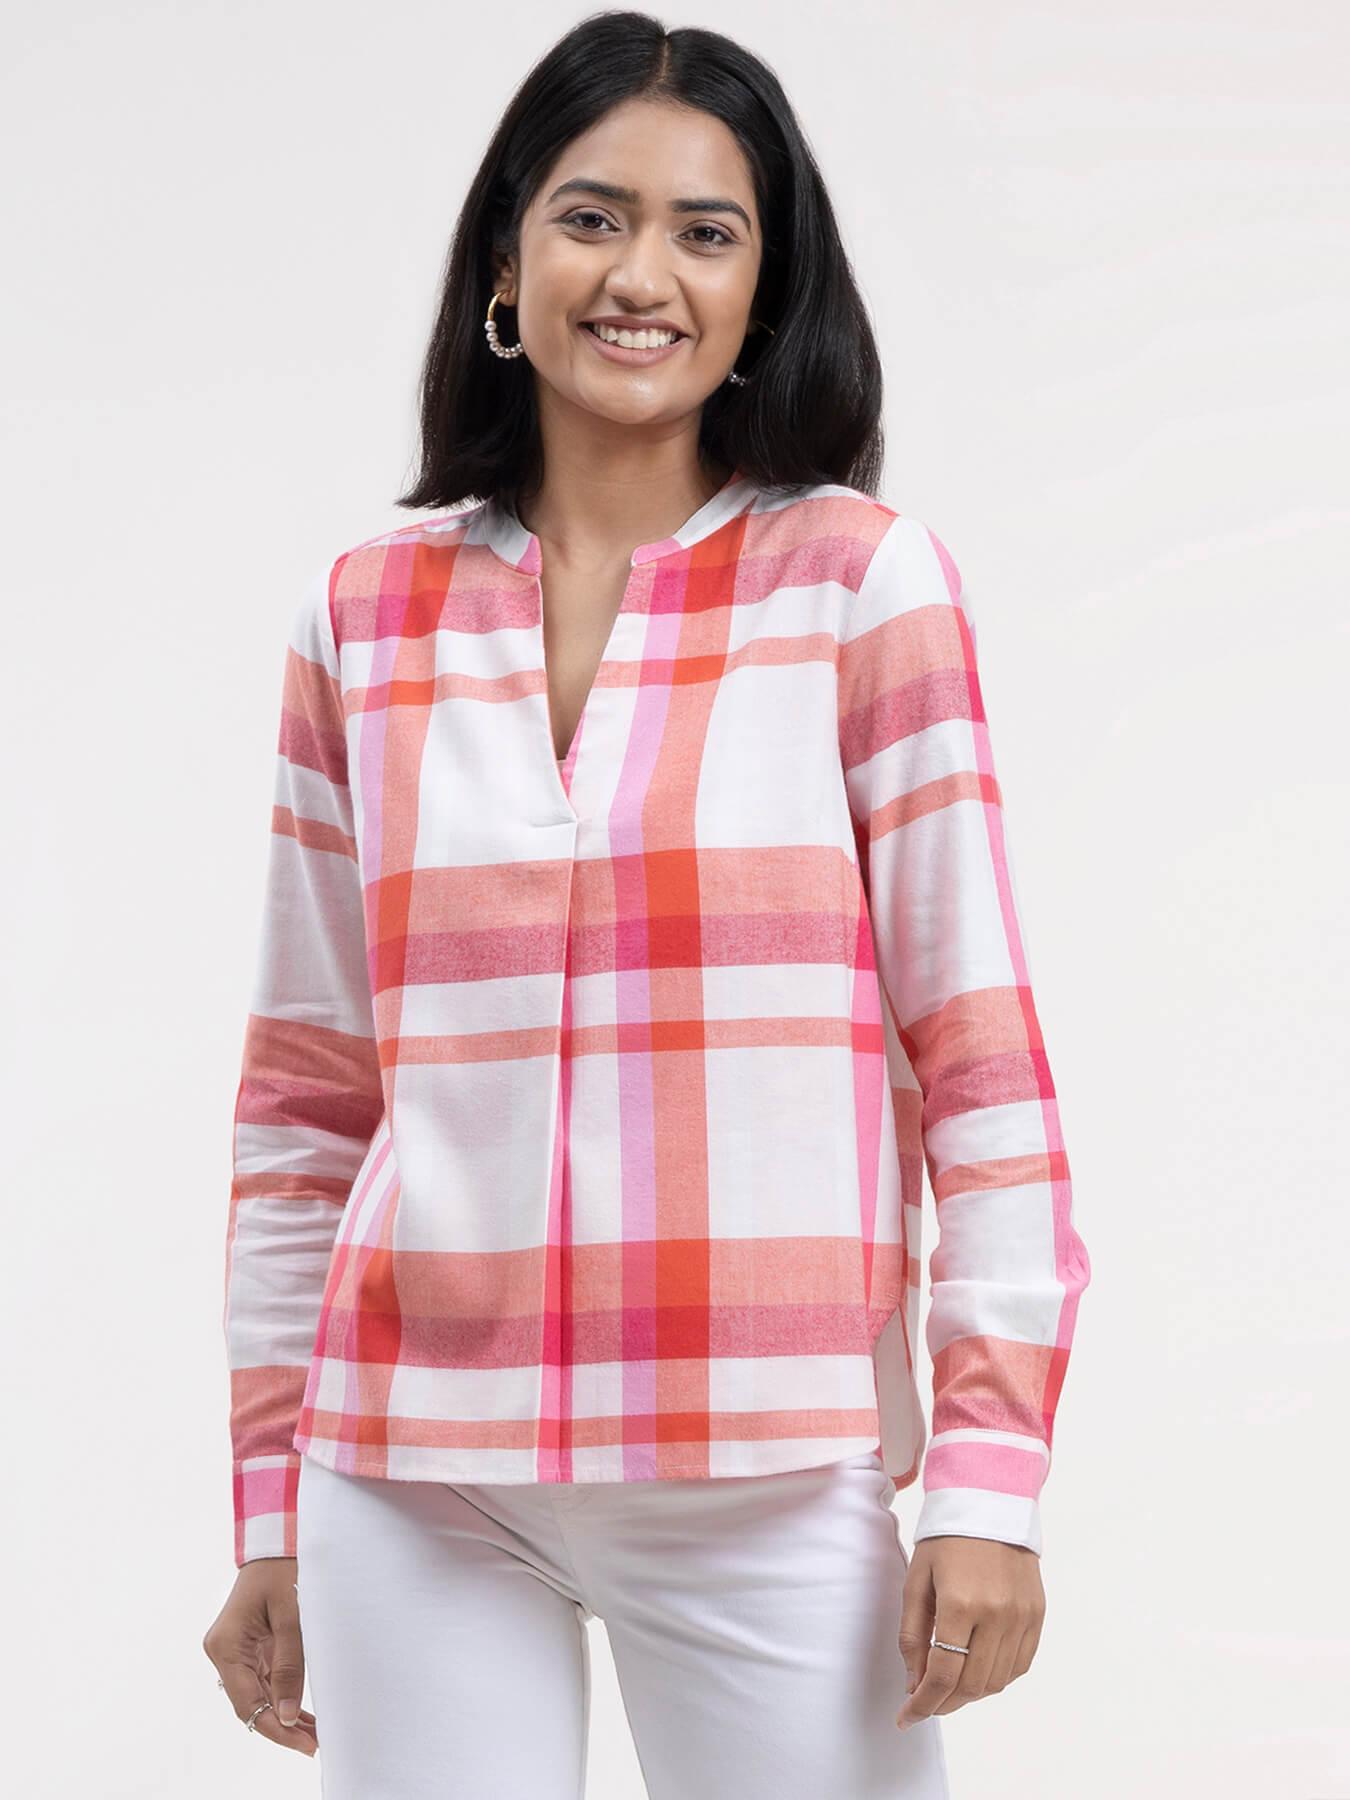 Cotton Checkered Top - White and Pink| Formal Tops